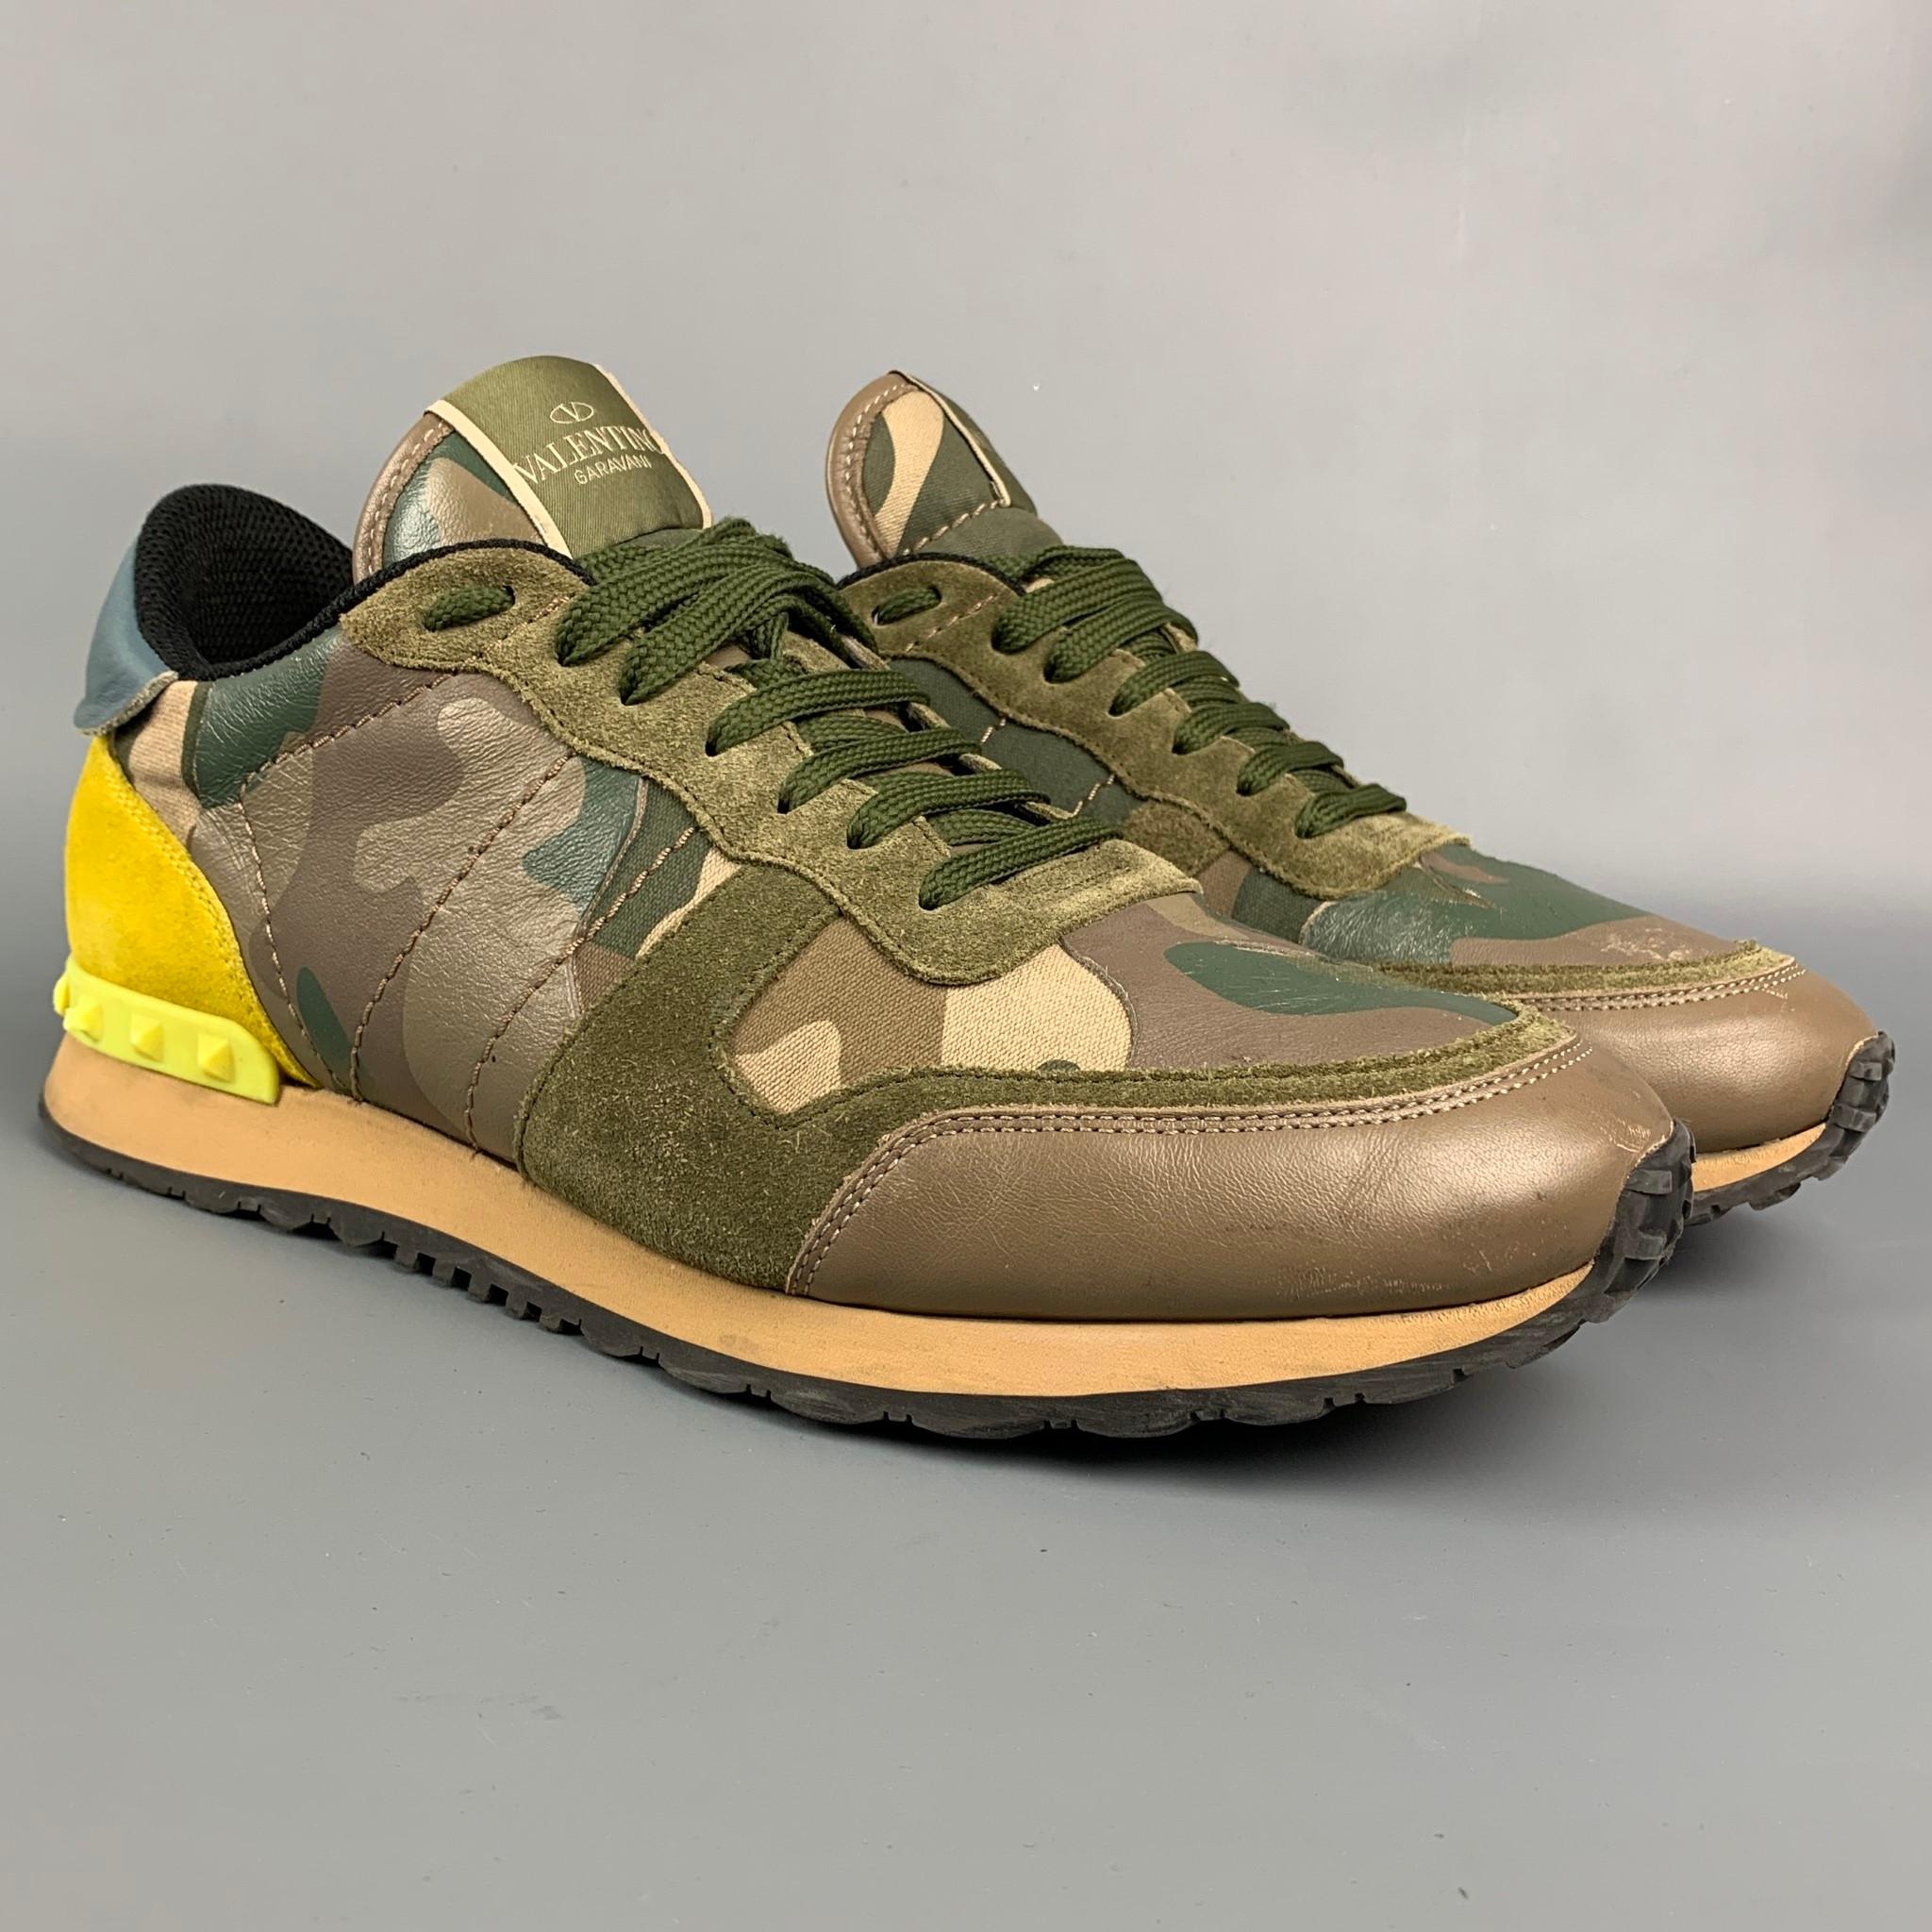 VALENTINO sneakers comes in a olive & yellow camouflage nylon with a suede trim featuring a spike detail, rubber sole, and a lace up closure. Includes box. Made in Italy.

Good Pre-Owned Condition. Minor wear throughout.
Marked: TG723 43

Outsole: